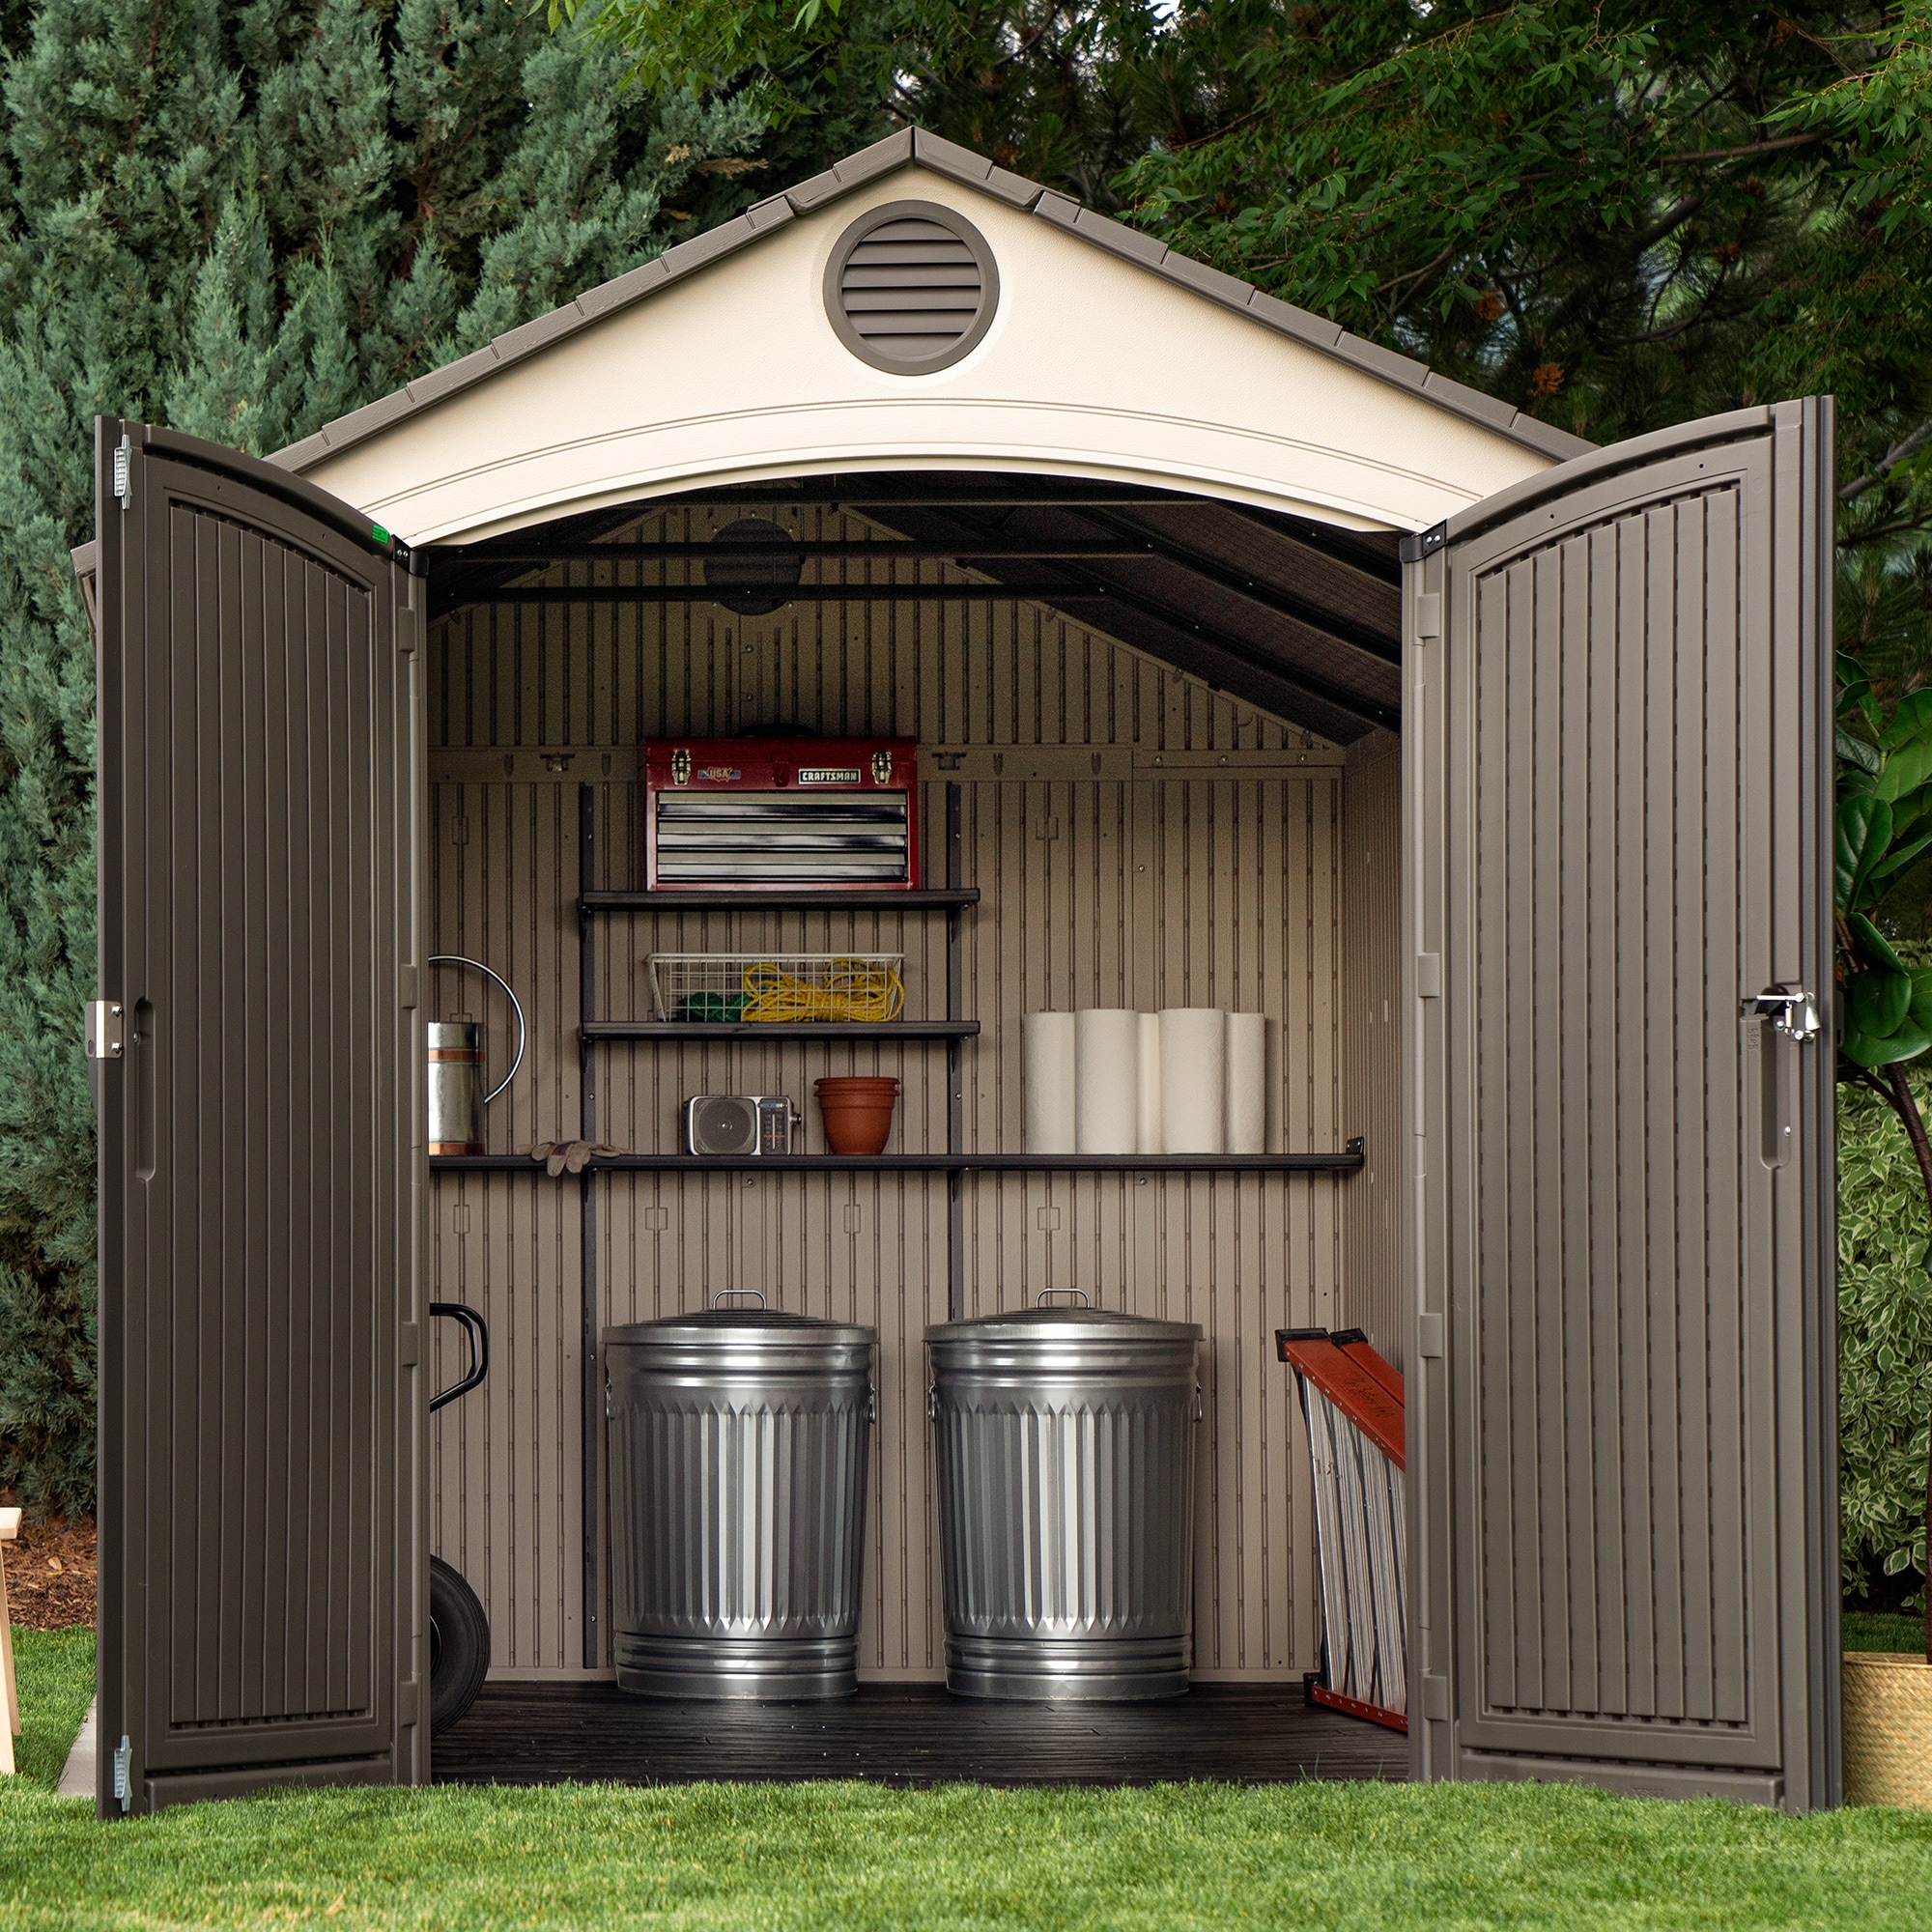 LIFETIME PRODUCTS 8-ft x 12-ft Lifetime Storage Shed Gable Resin